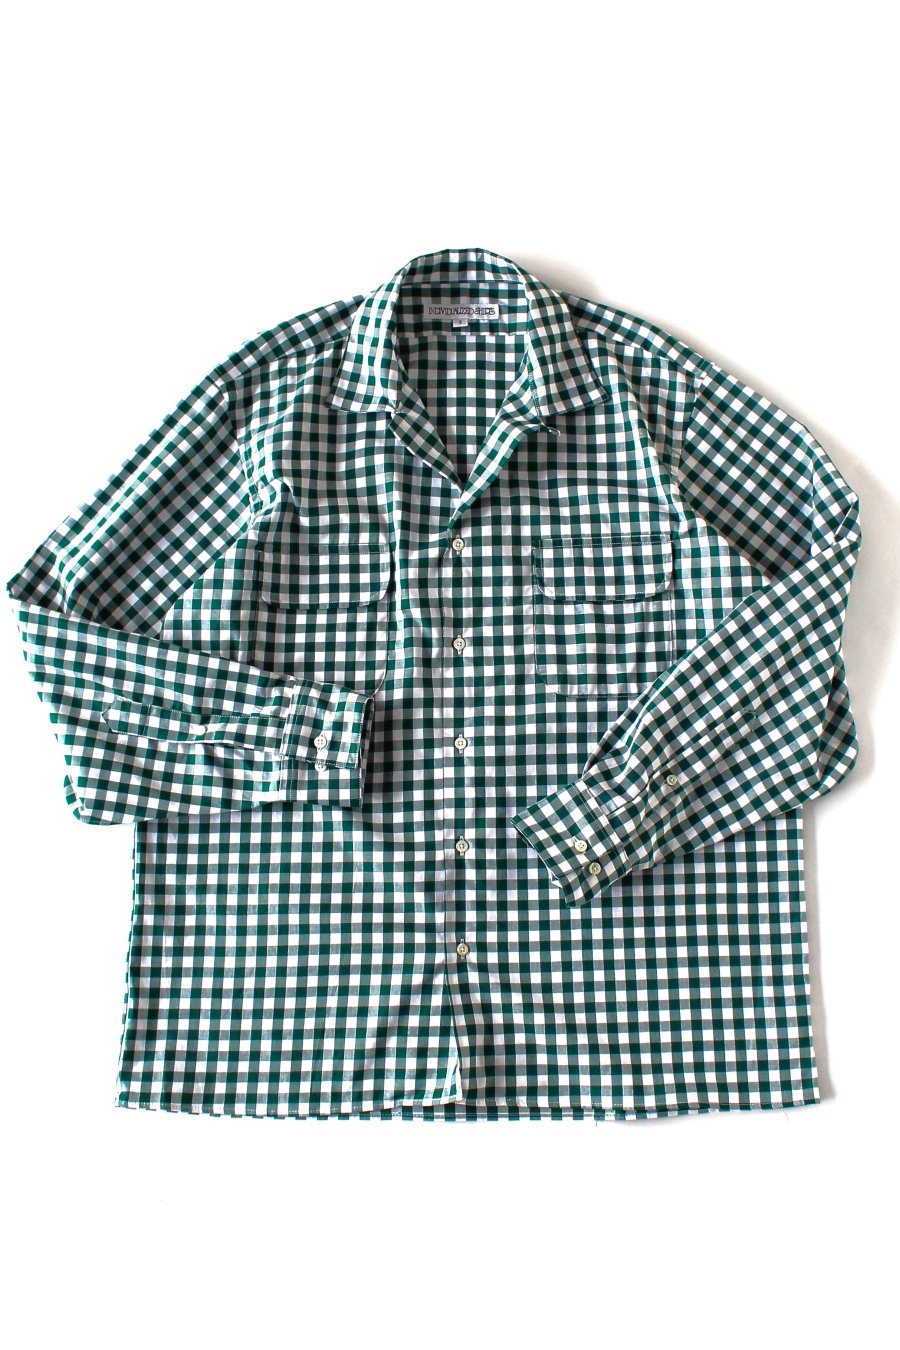 INDIVIDUALIZED SHIRTS<span style="color:#ff0000"><b> 40%OFF</b></span><br />ӥå󥬥ॷ